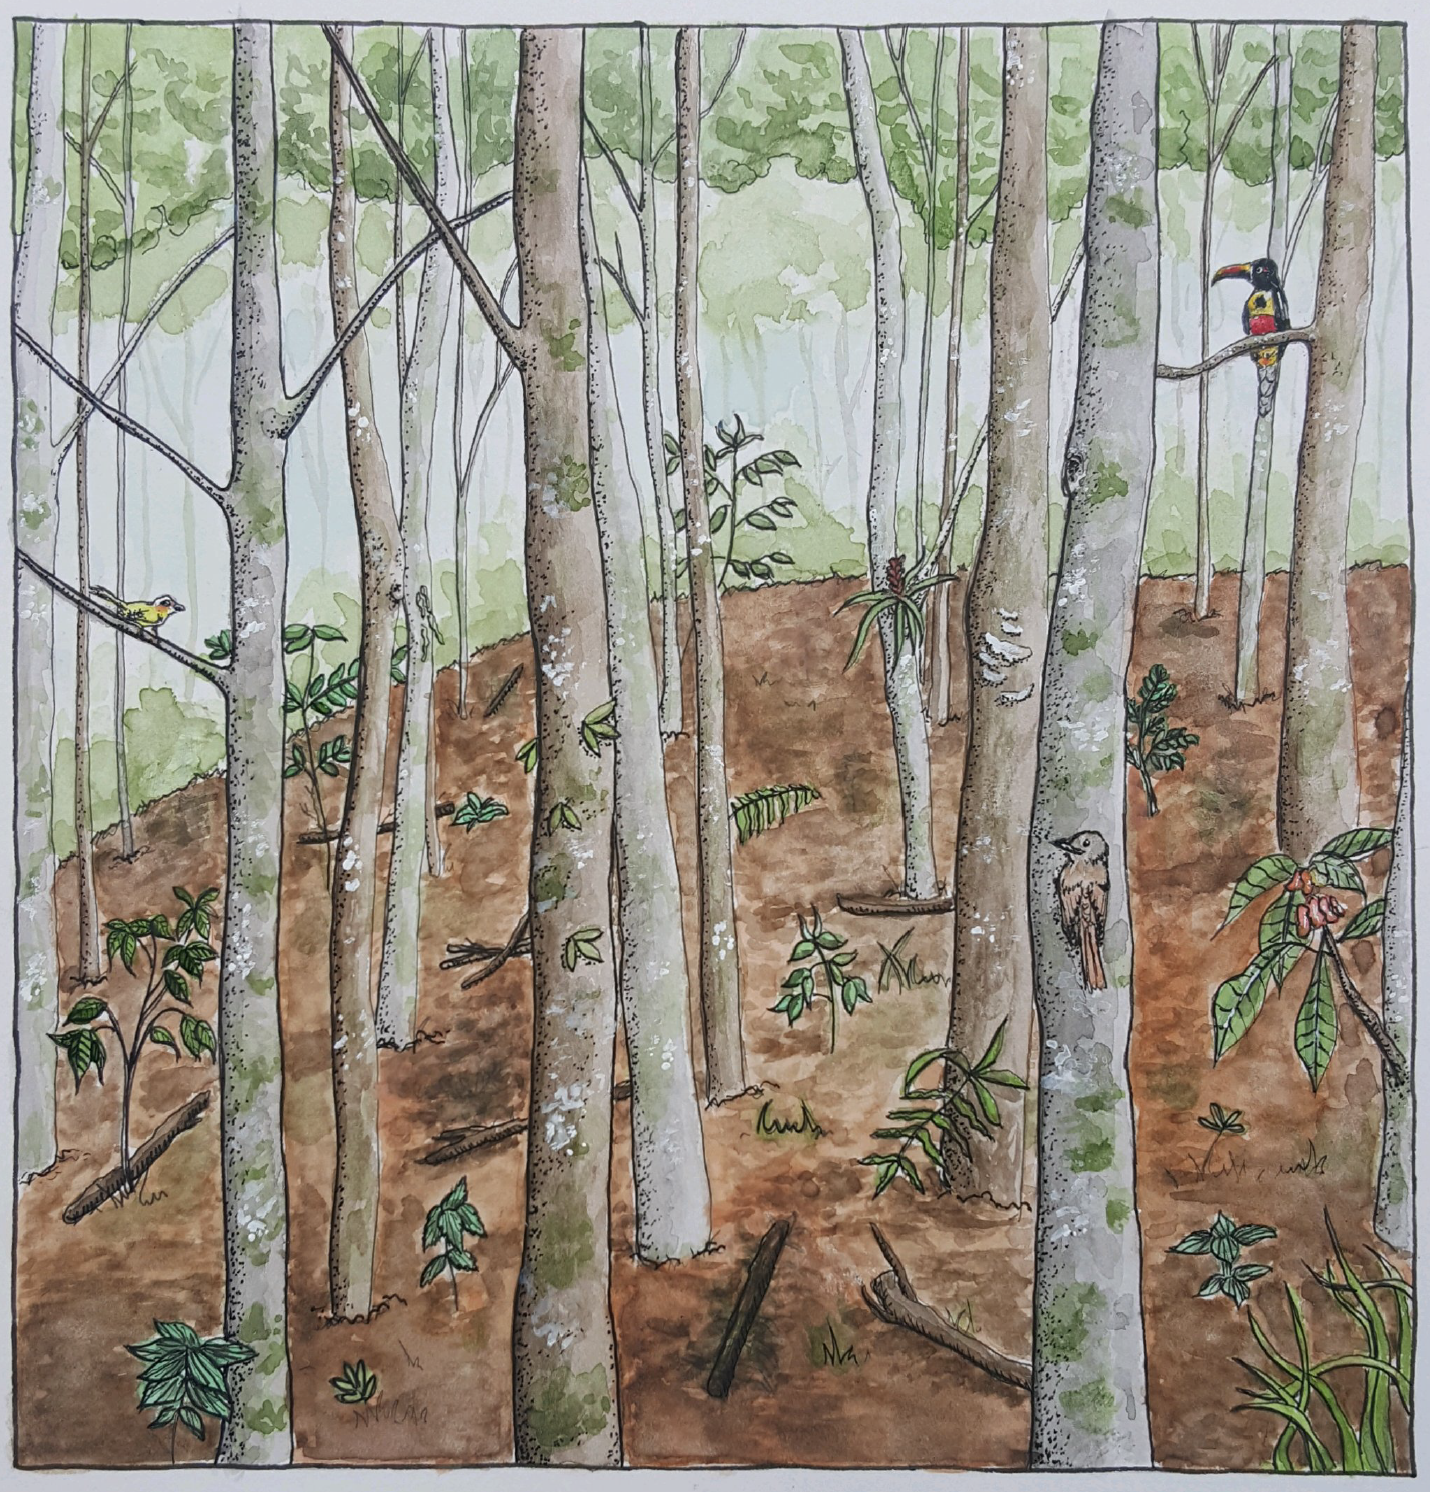 A drawing of animals in a reforested forest